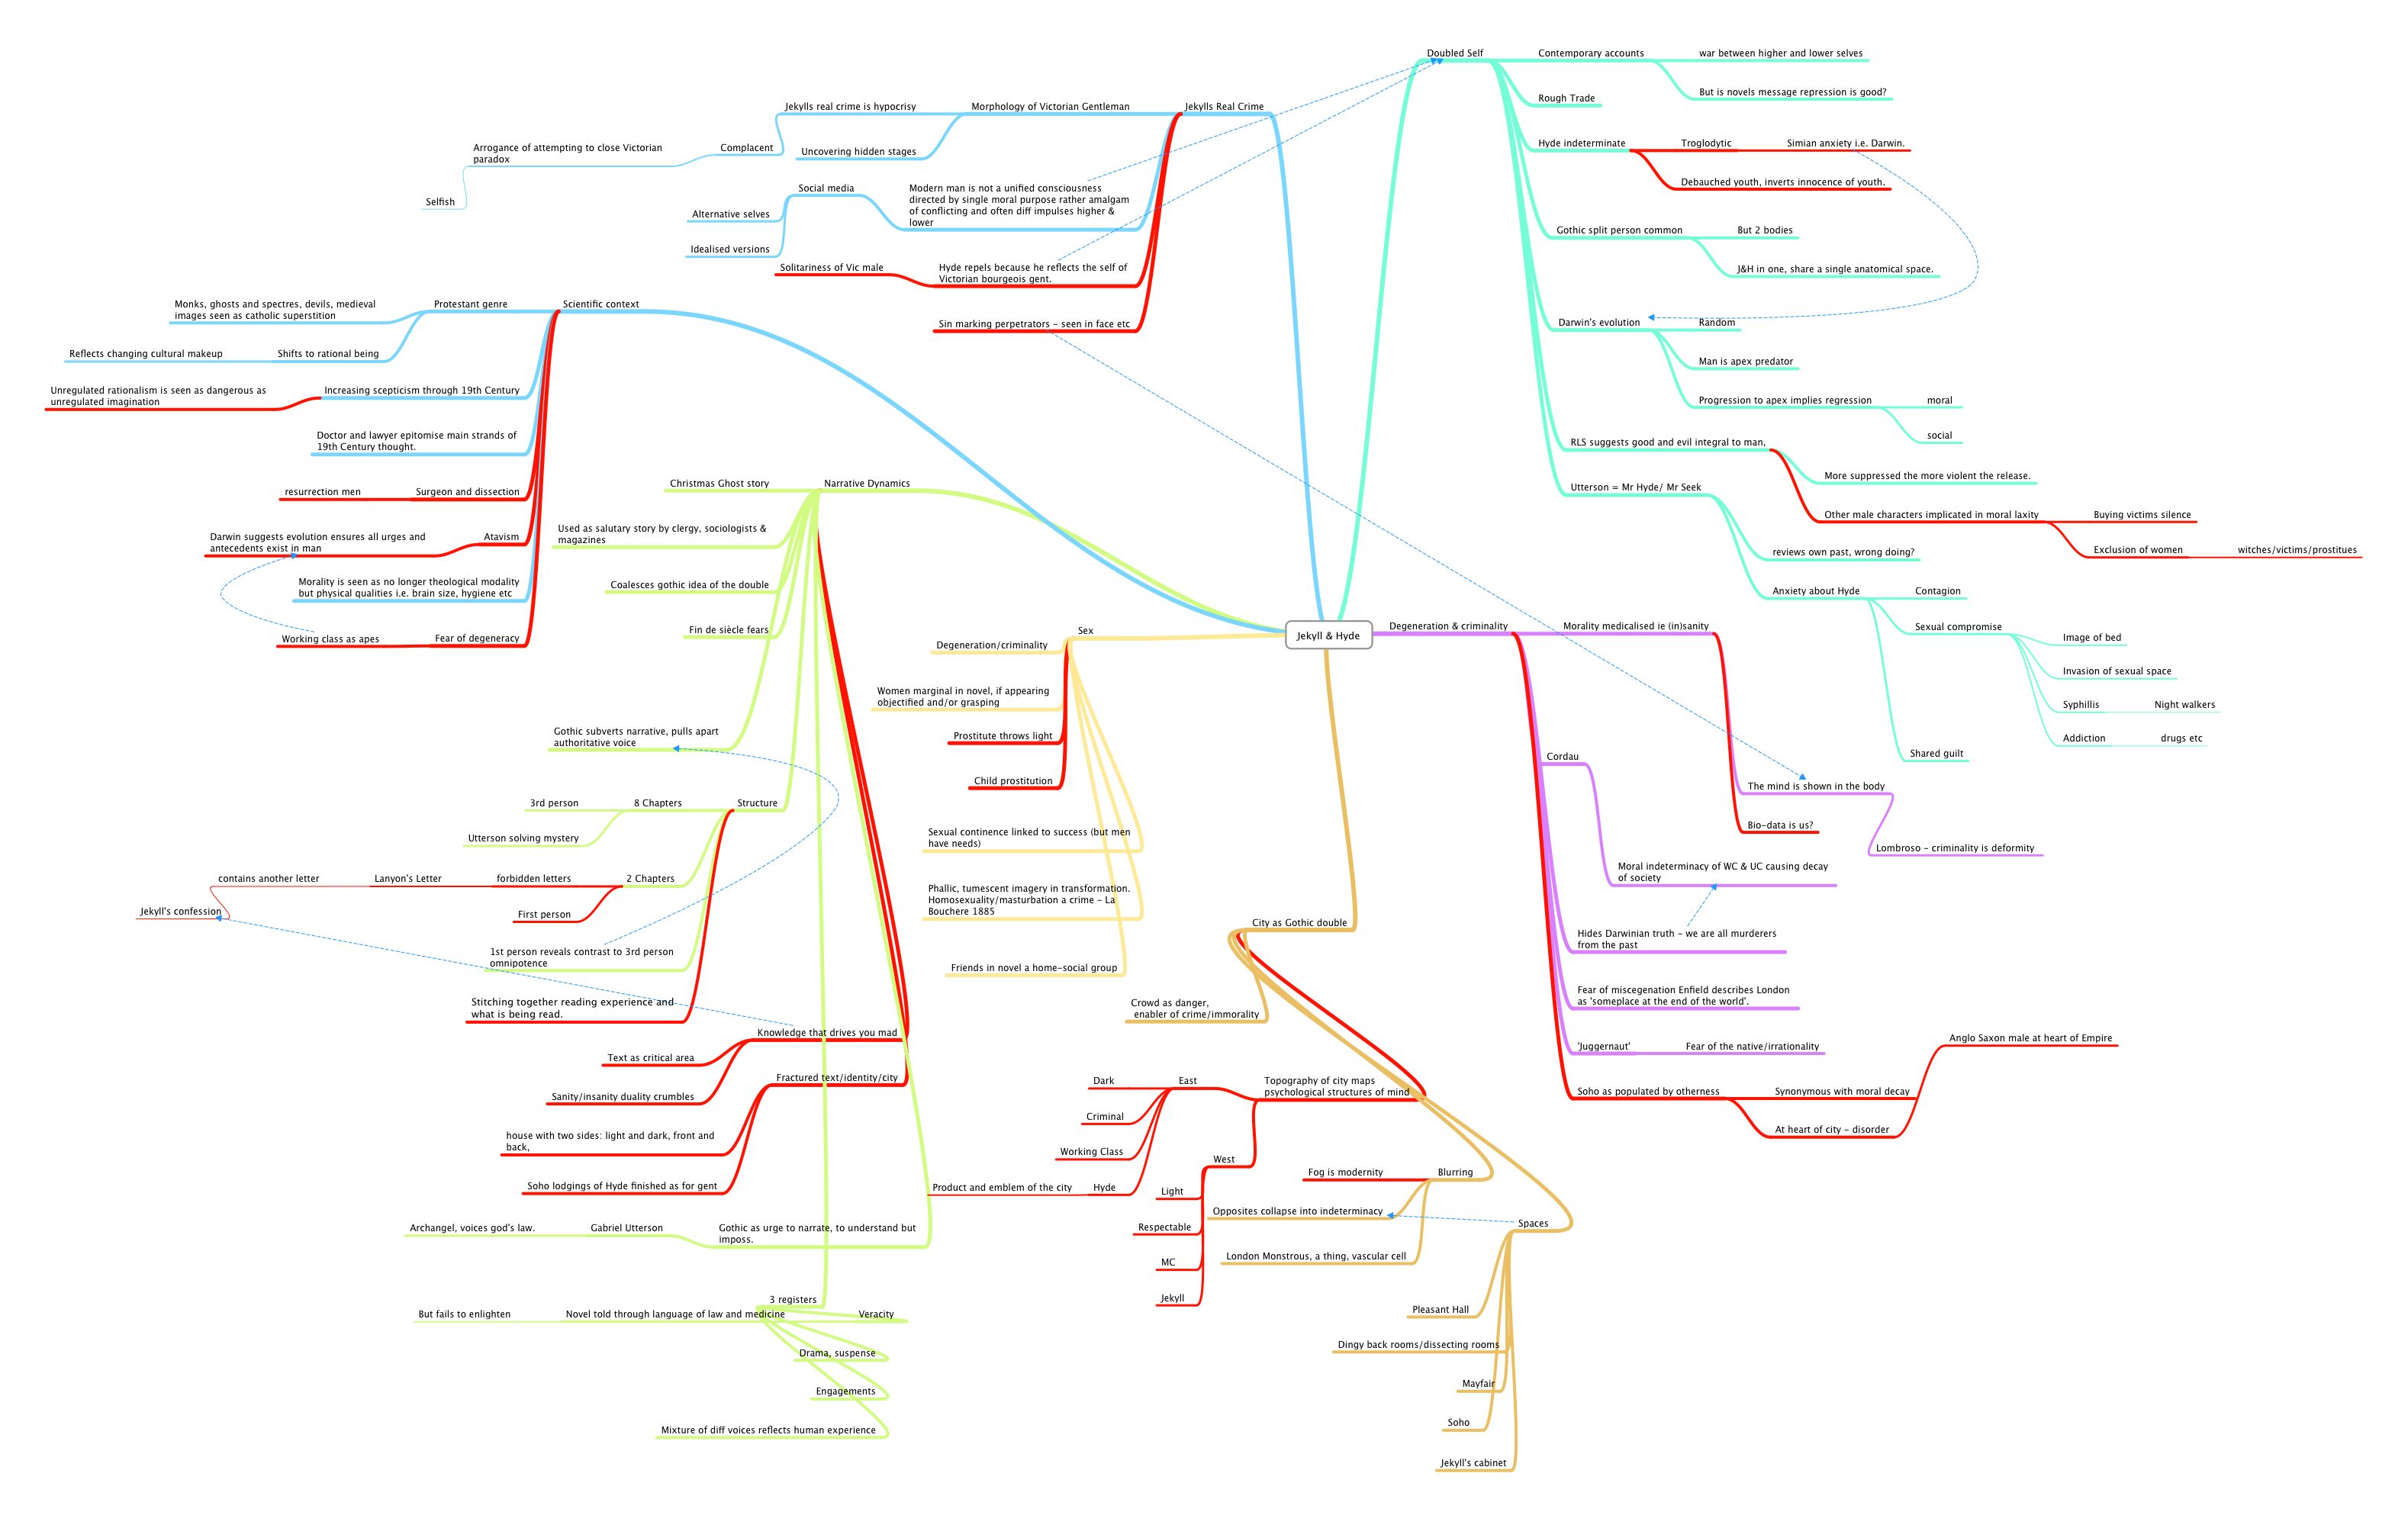 Jekyll & Hyde in a mind map